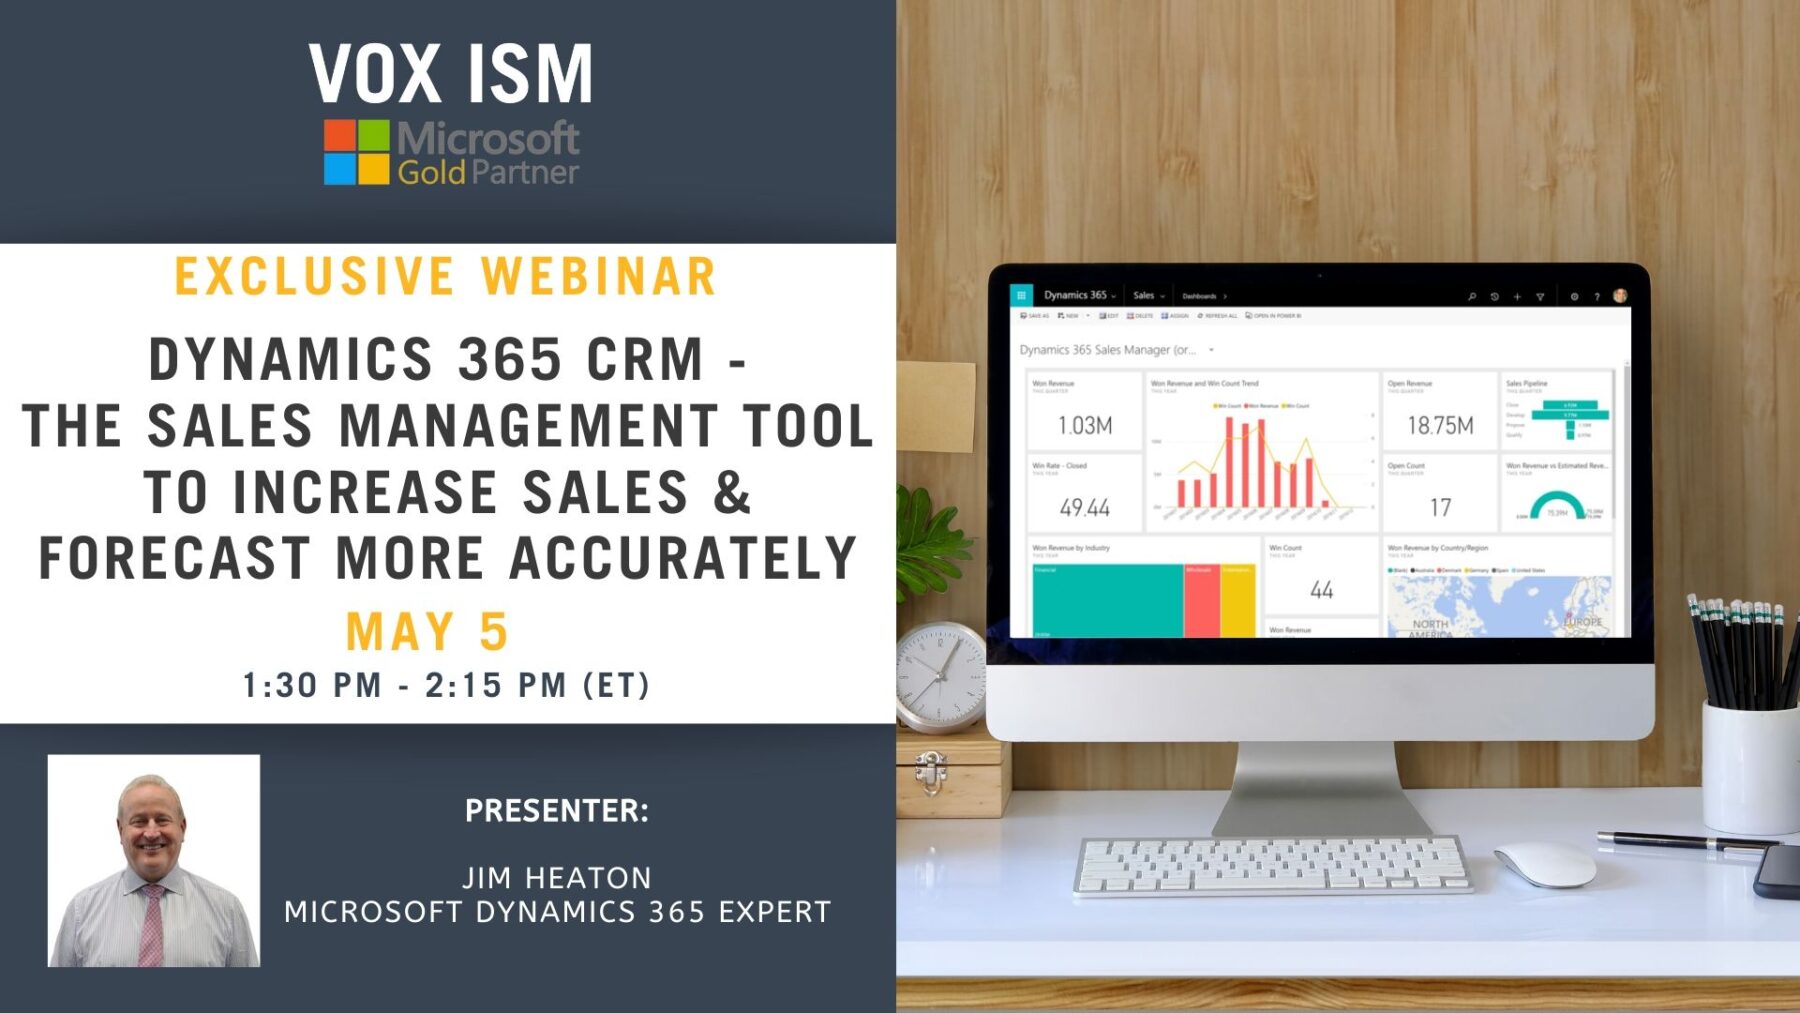 CRM - The Sales Management Tool to Increase Sales & Forecast More Accurately - May 5 - Webinar VOX ISM